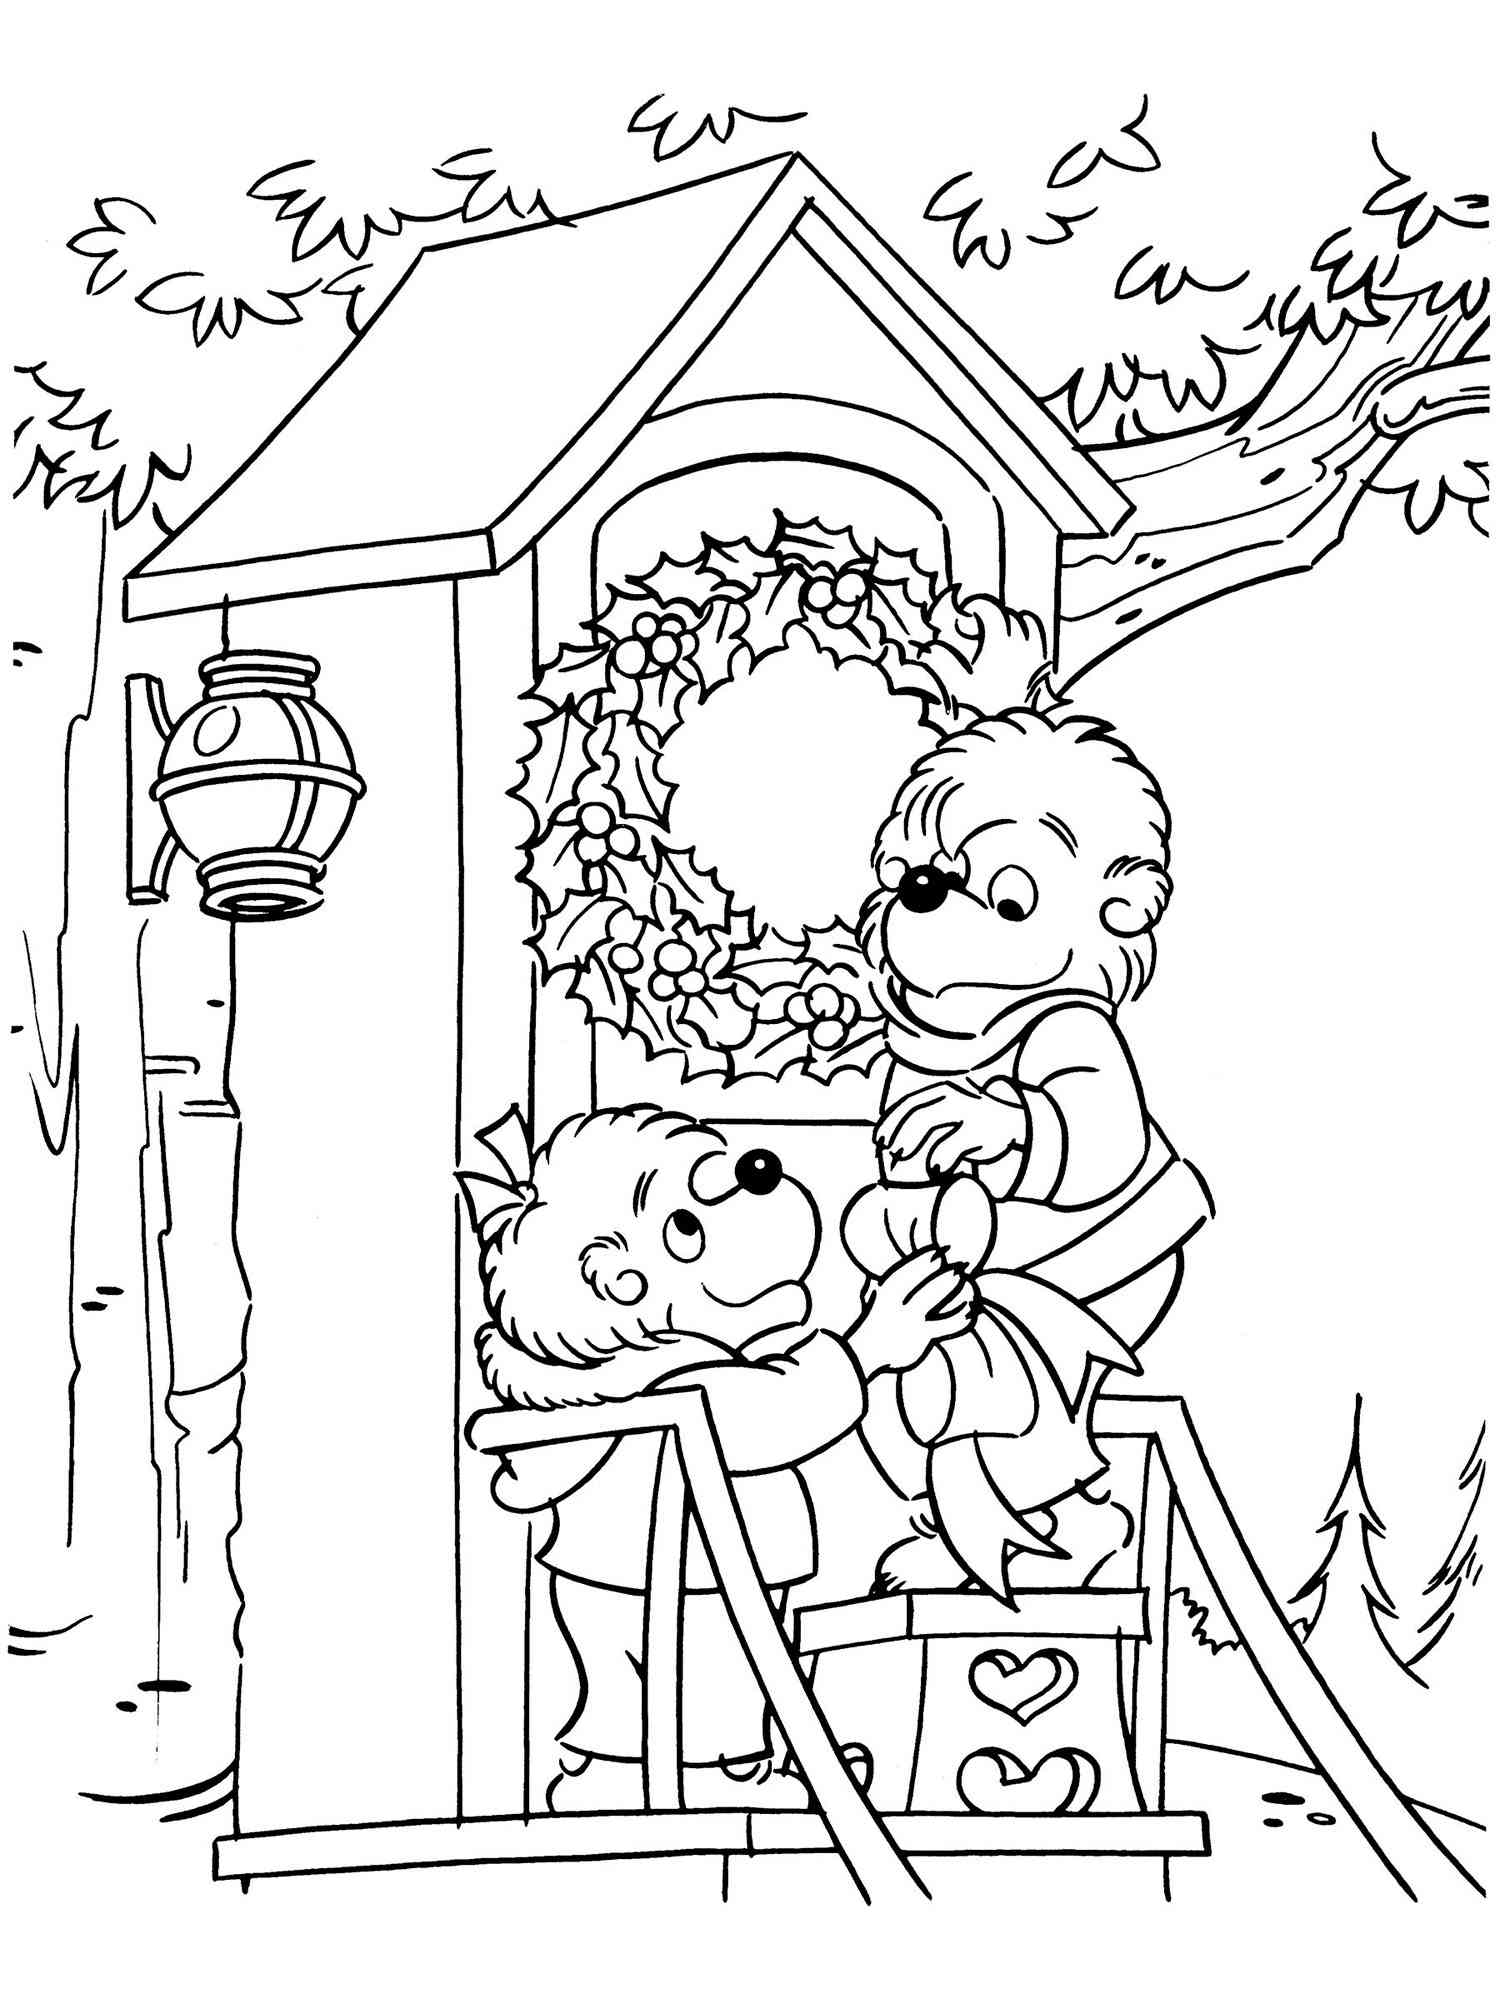 Berenstain Bears 4 coloring page